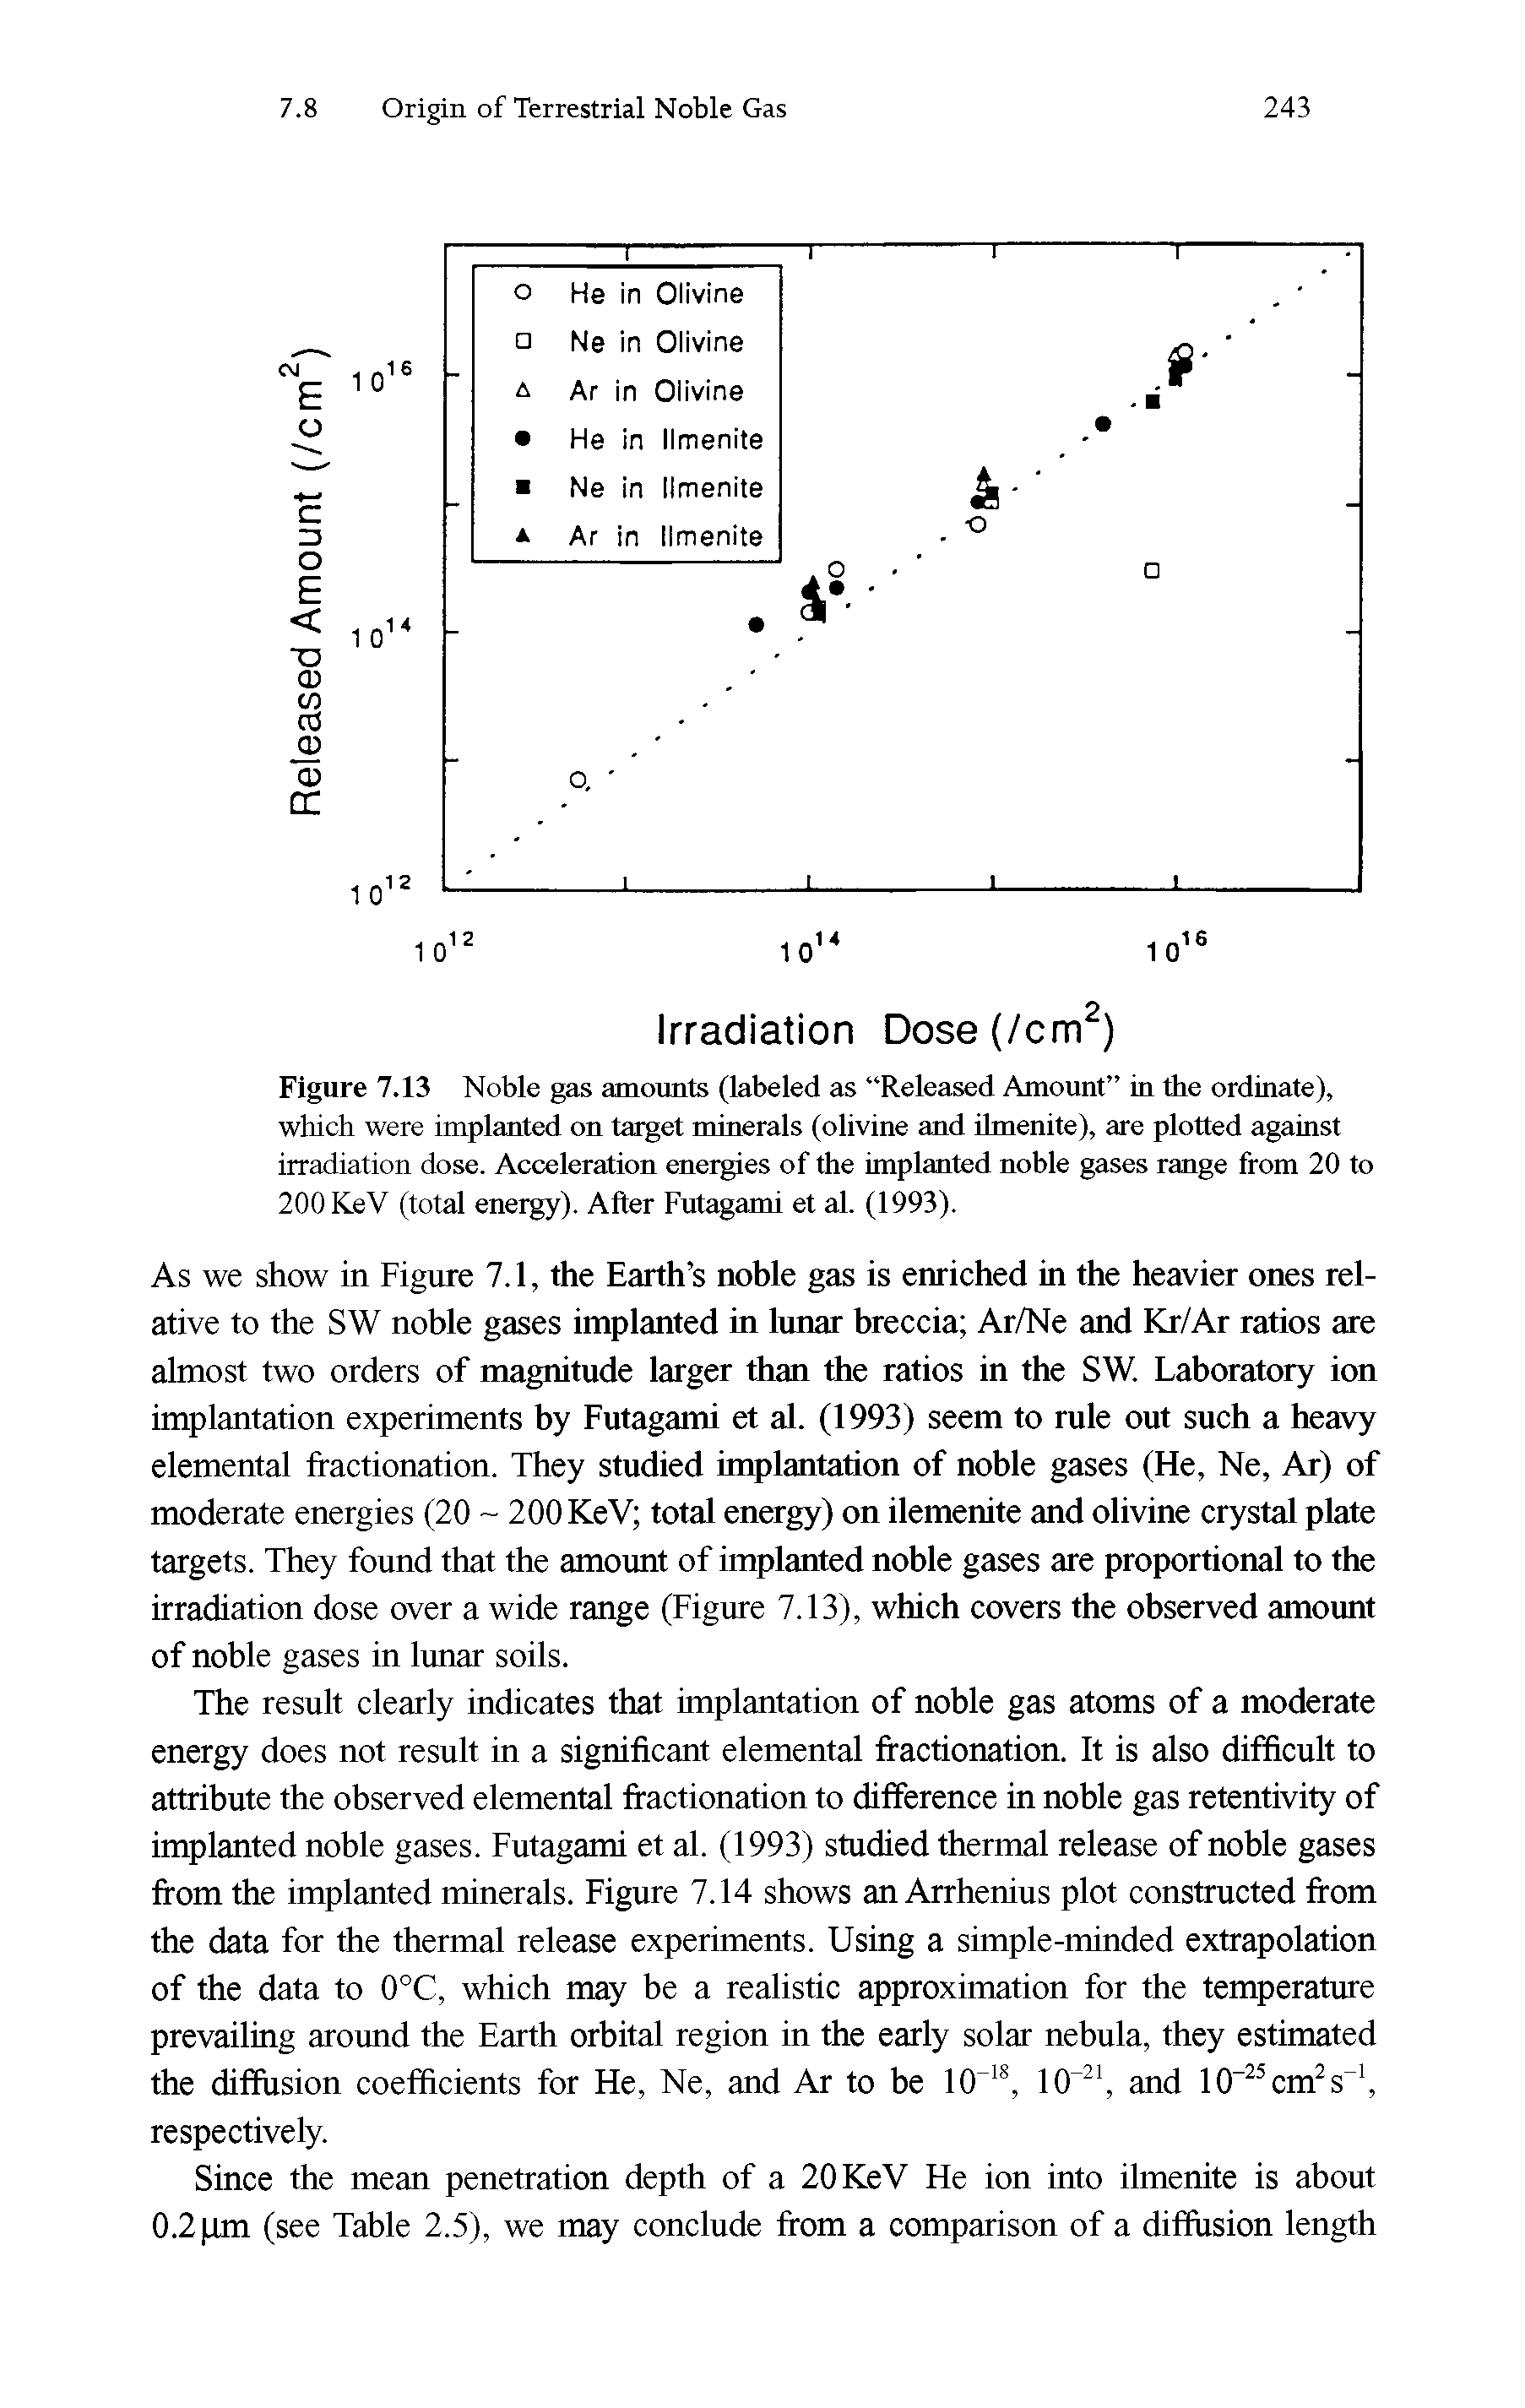 Figure 7.13 Noble gas amounts (labeled as Released Amount in the ordinate), which were implanted on target minerals (olivine and ihnenite), are plotted against irradiation dose. Acceleration energies of the implanted noble gases range from 20 to 200 KeV (total energy). After Futagami et al. (1993).